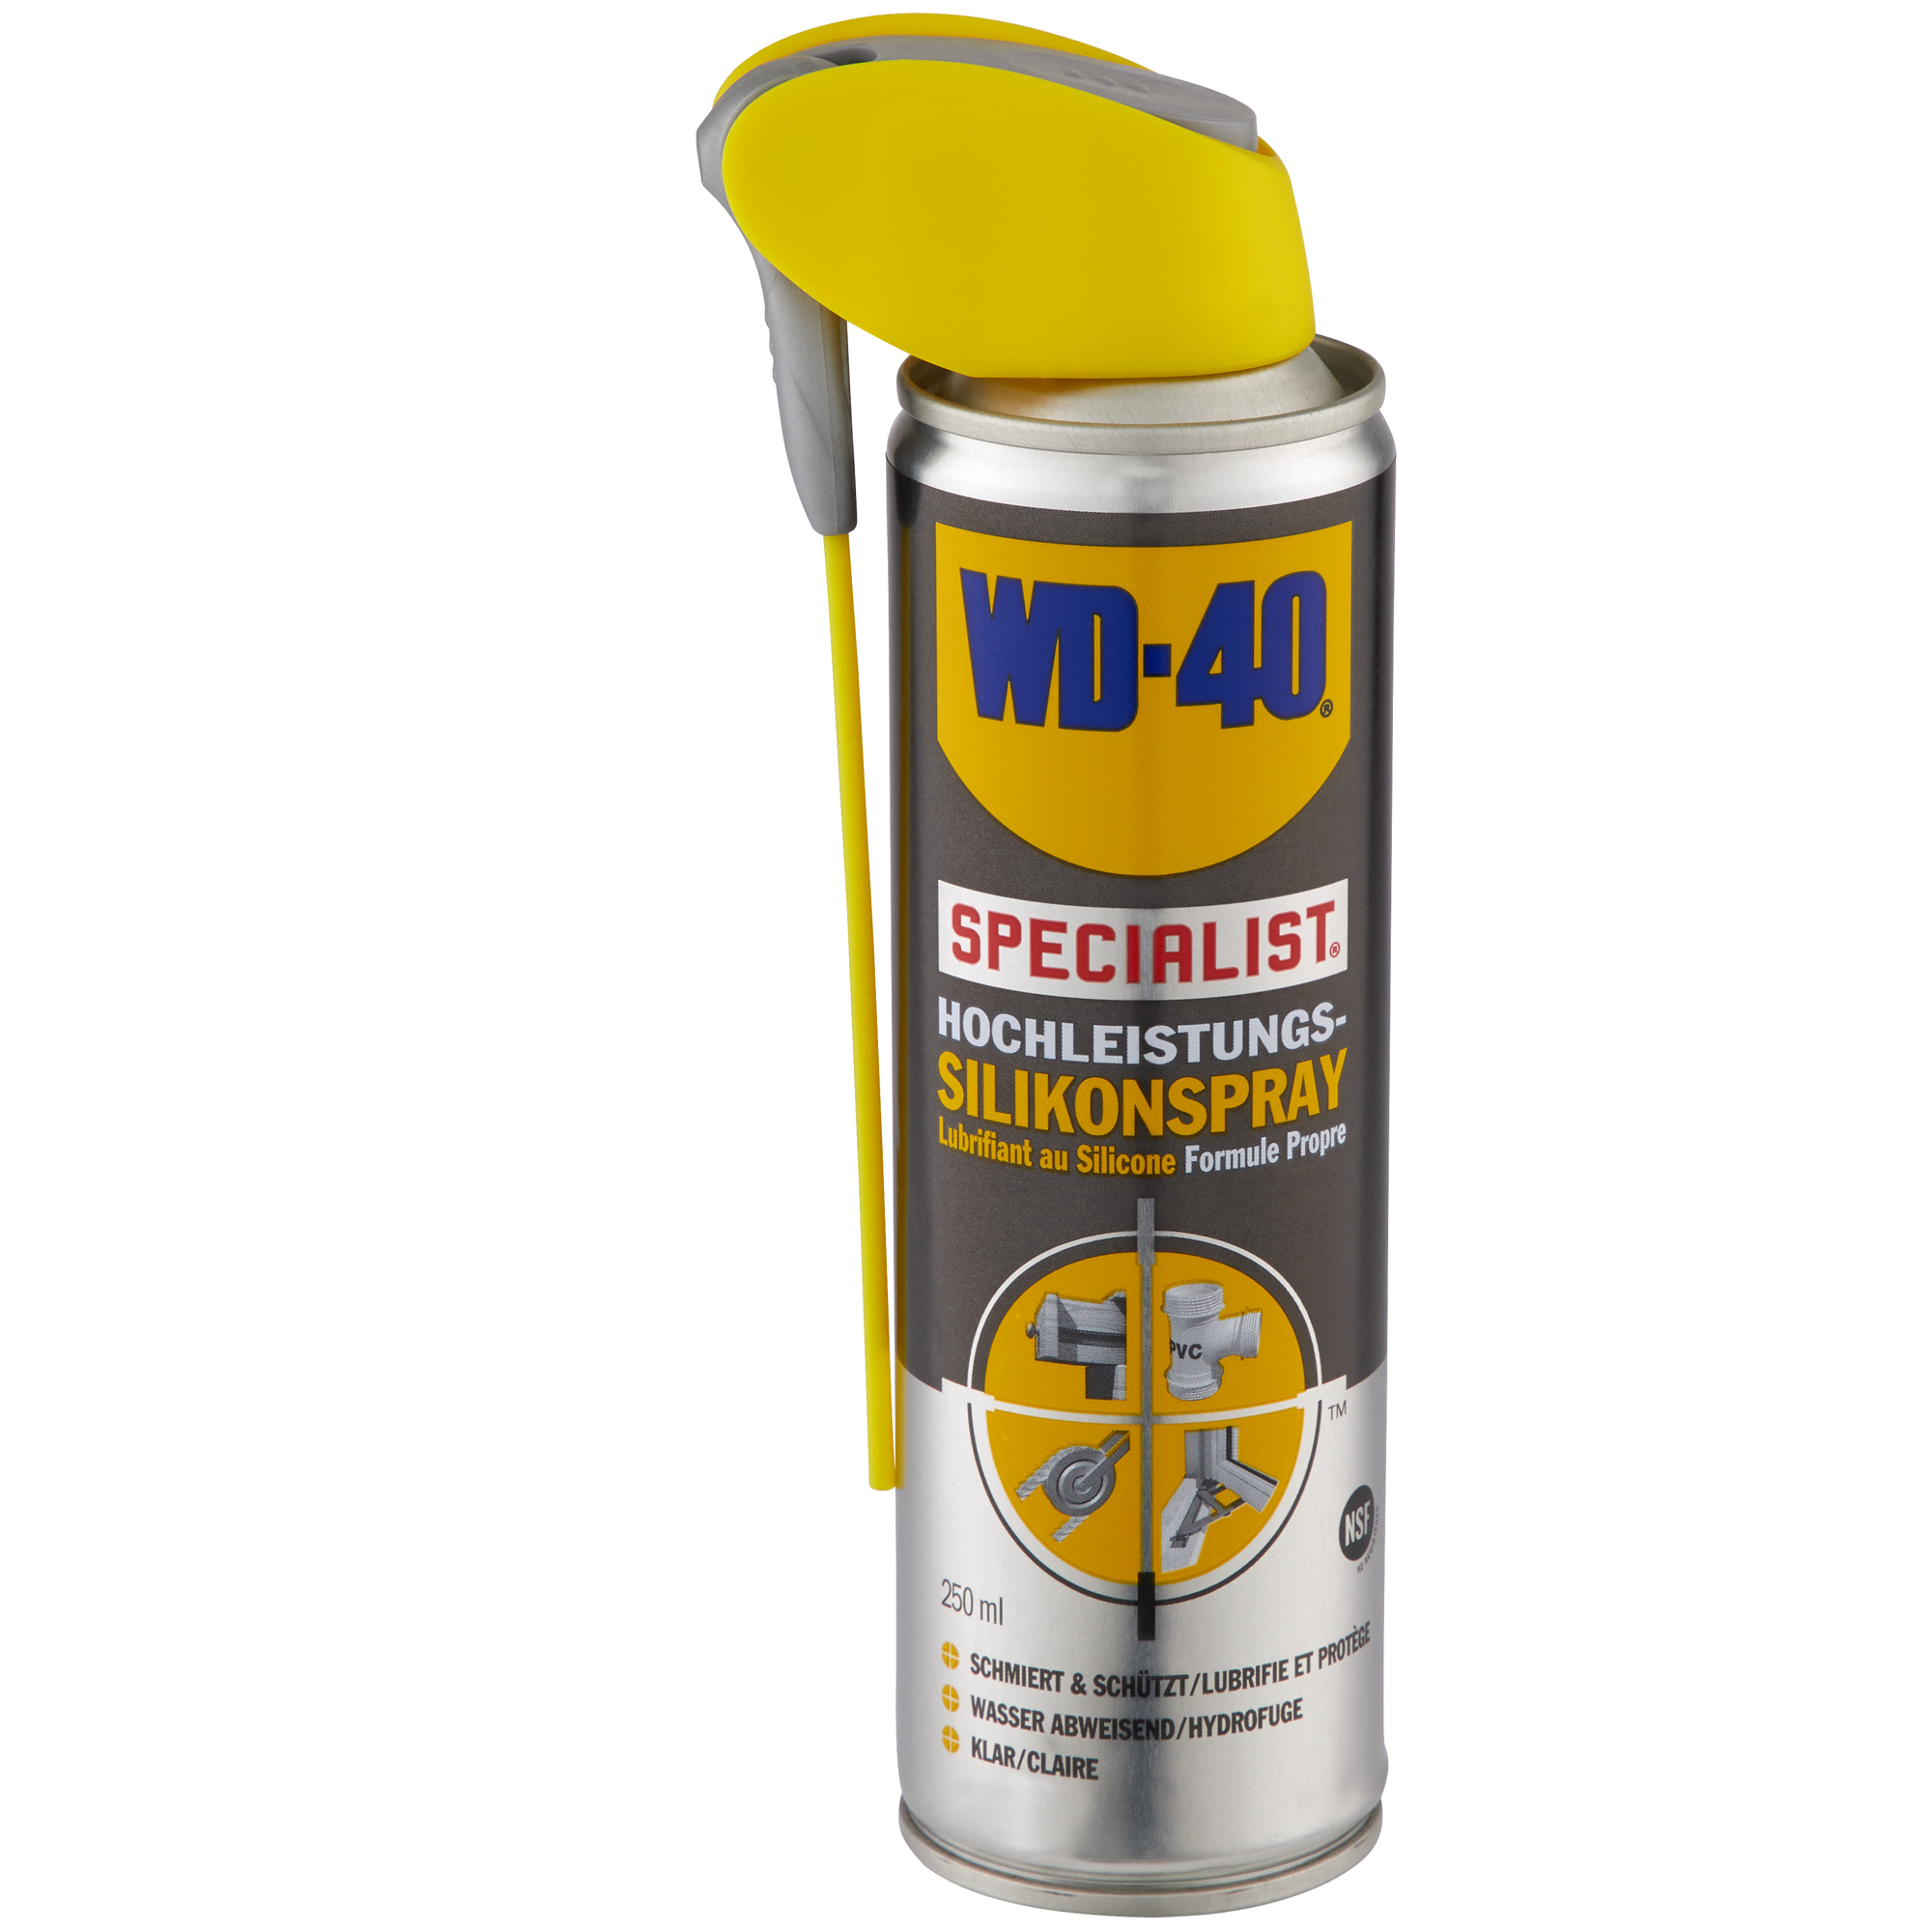 WD-40 Specialist Hochleistungs-Silikonspray 250 ml + product picture